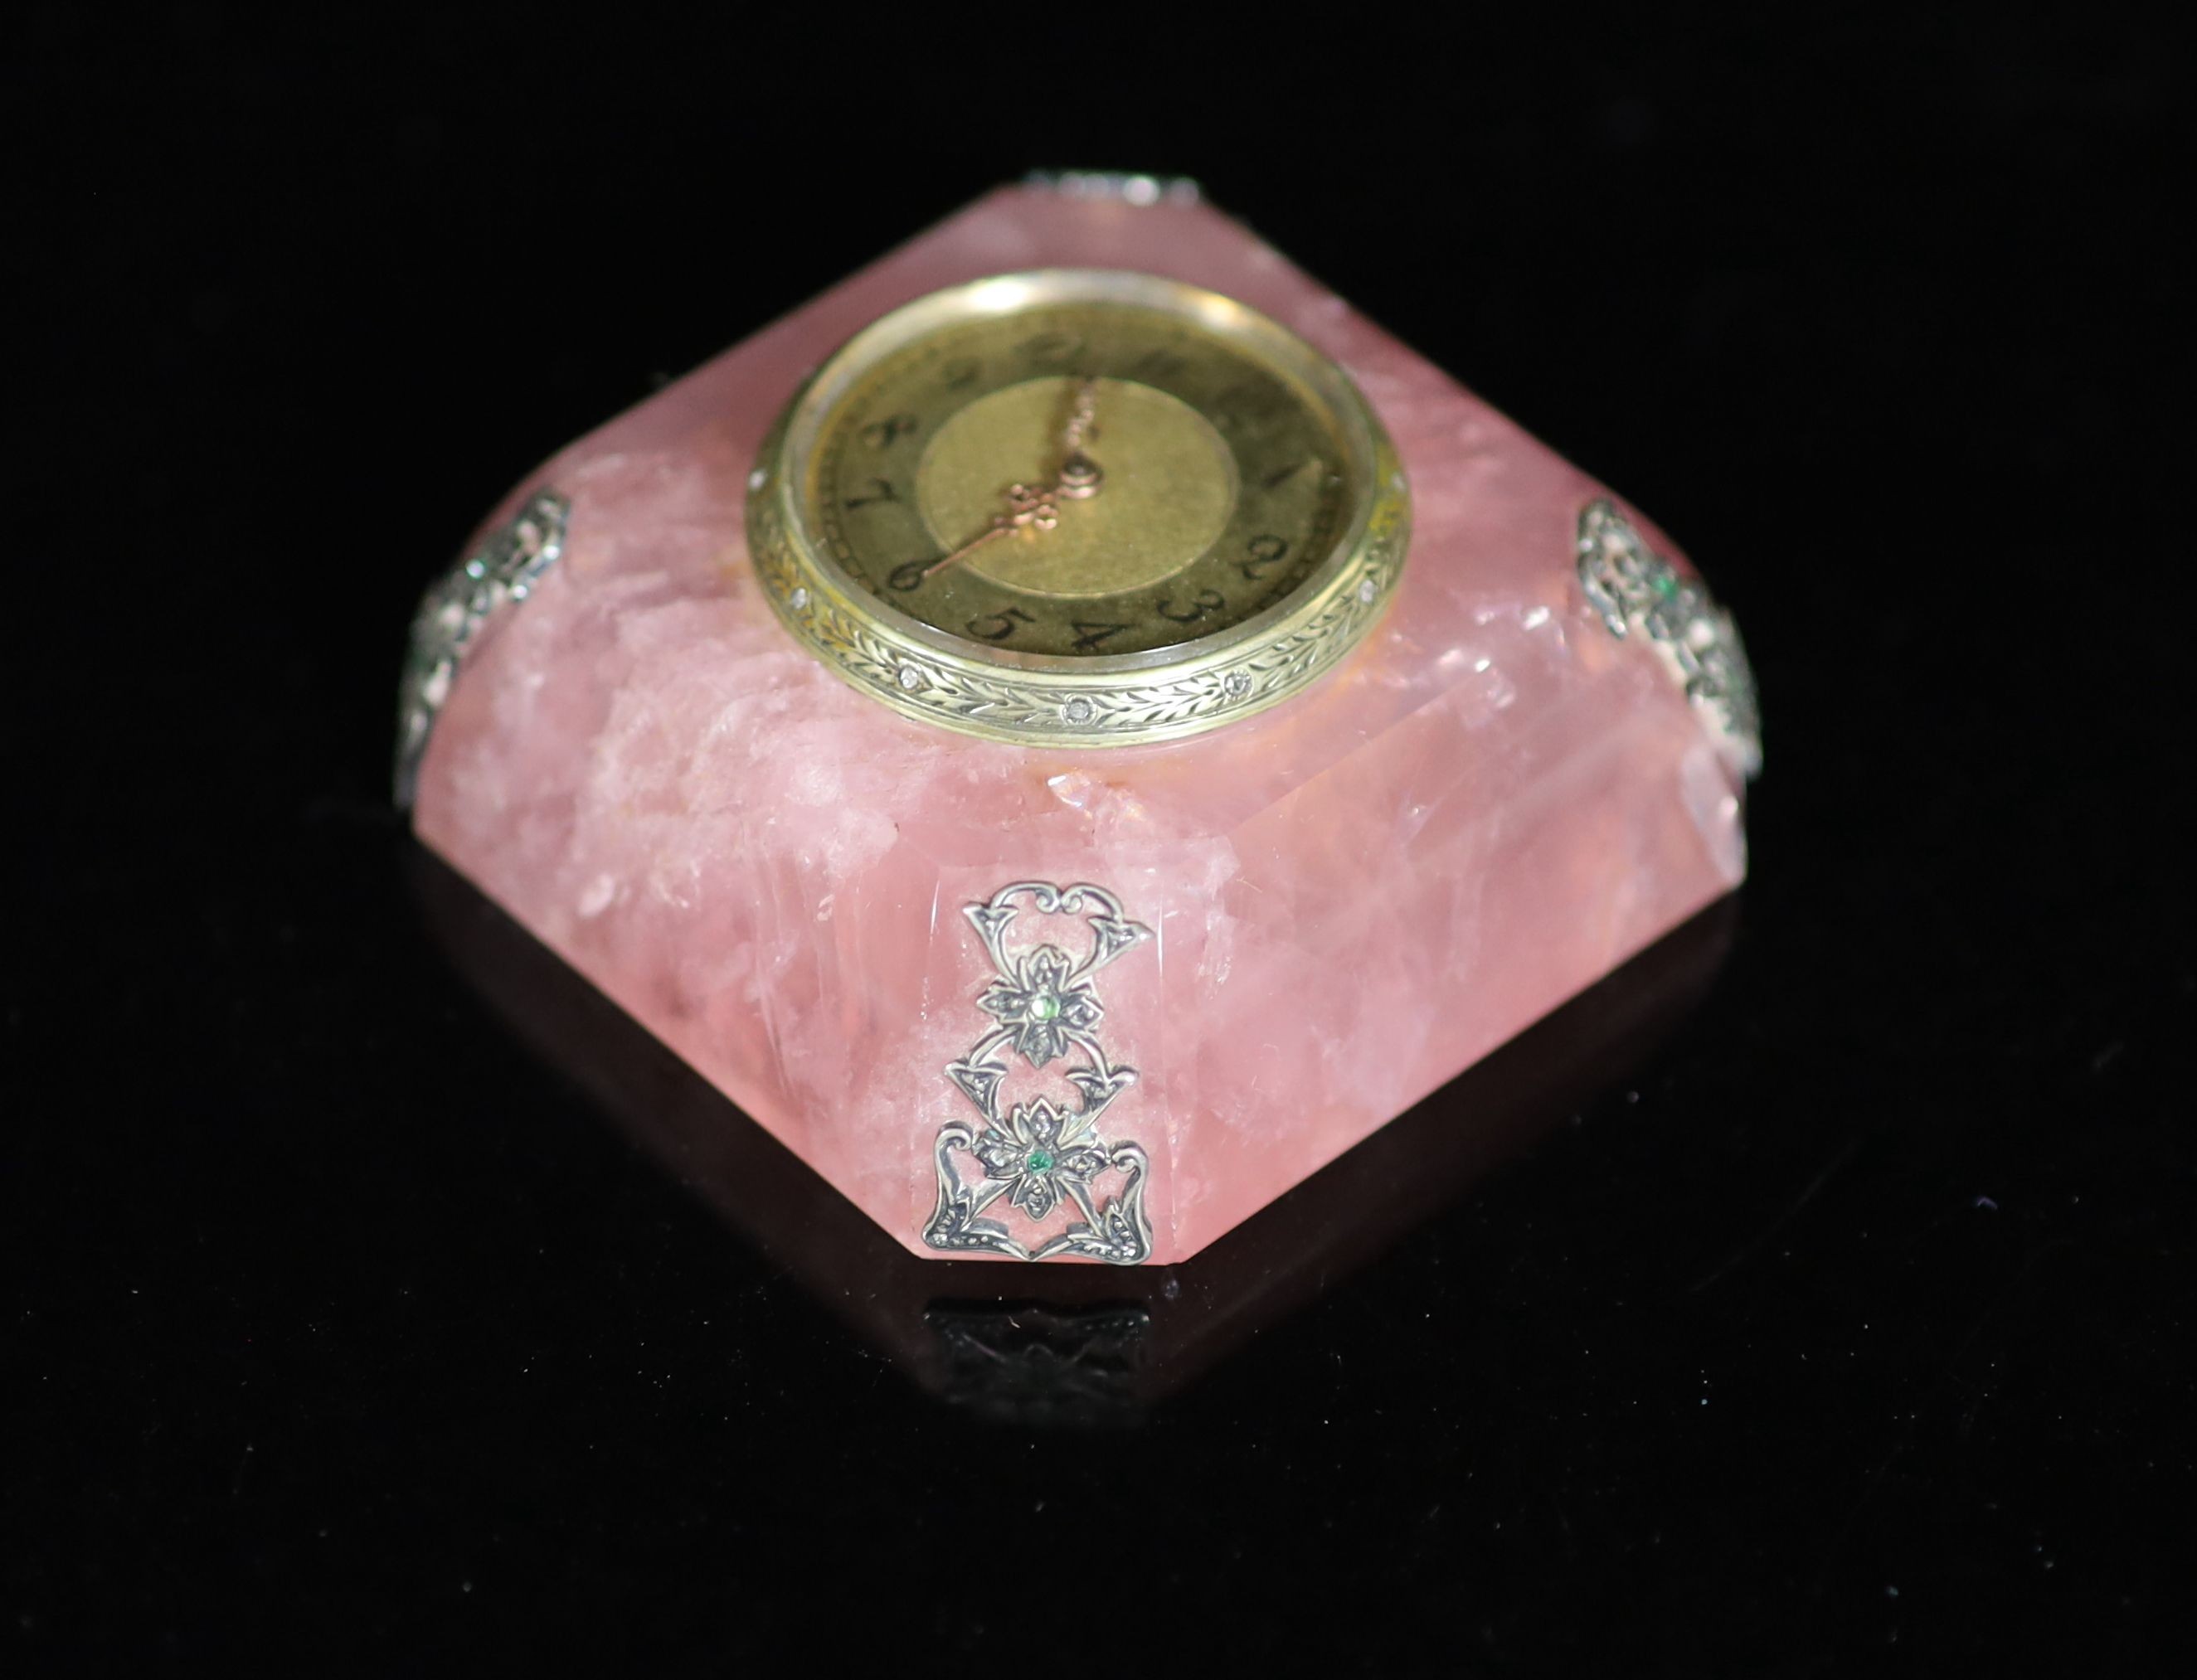 An early 20th century emerald, rose cut diamond, silver and gilt metal mounted rose quartz timepiece